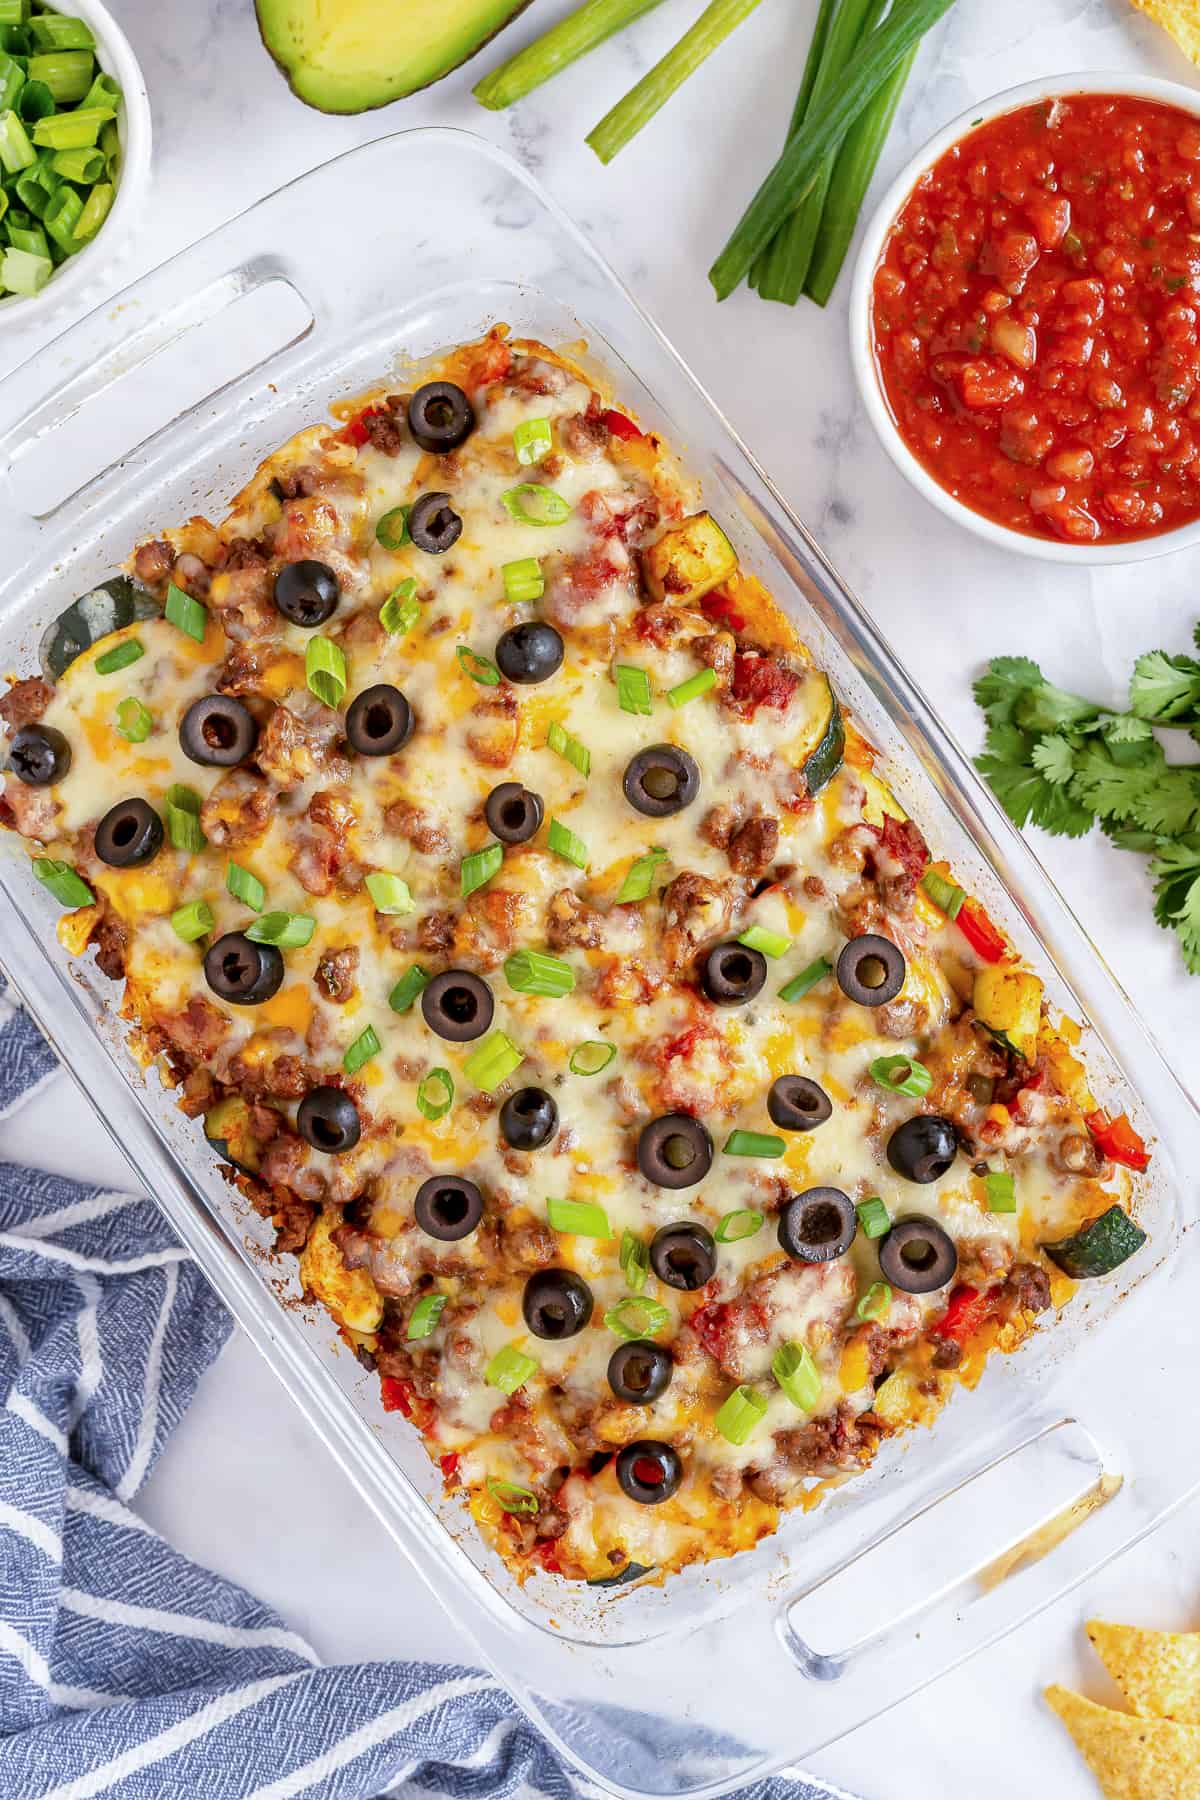 A casserole dish filled with Beef and Veggie Taco Bake shot from over the top.